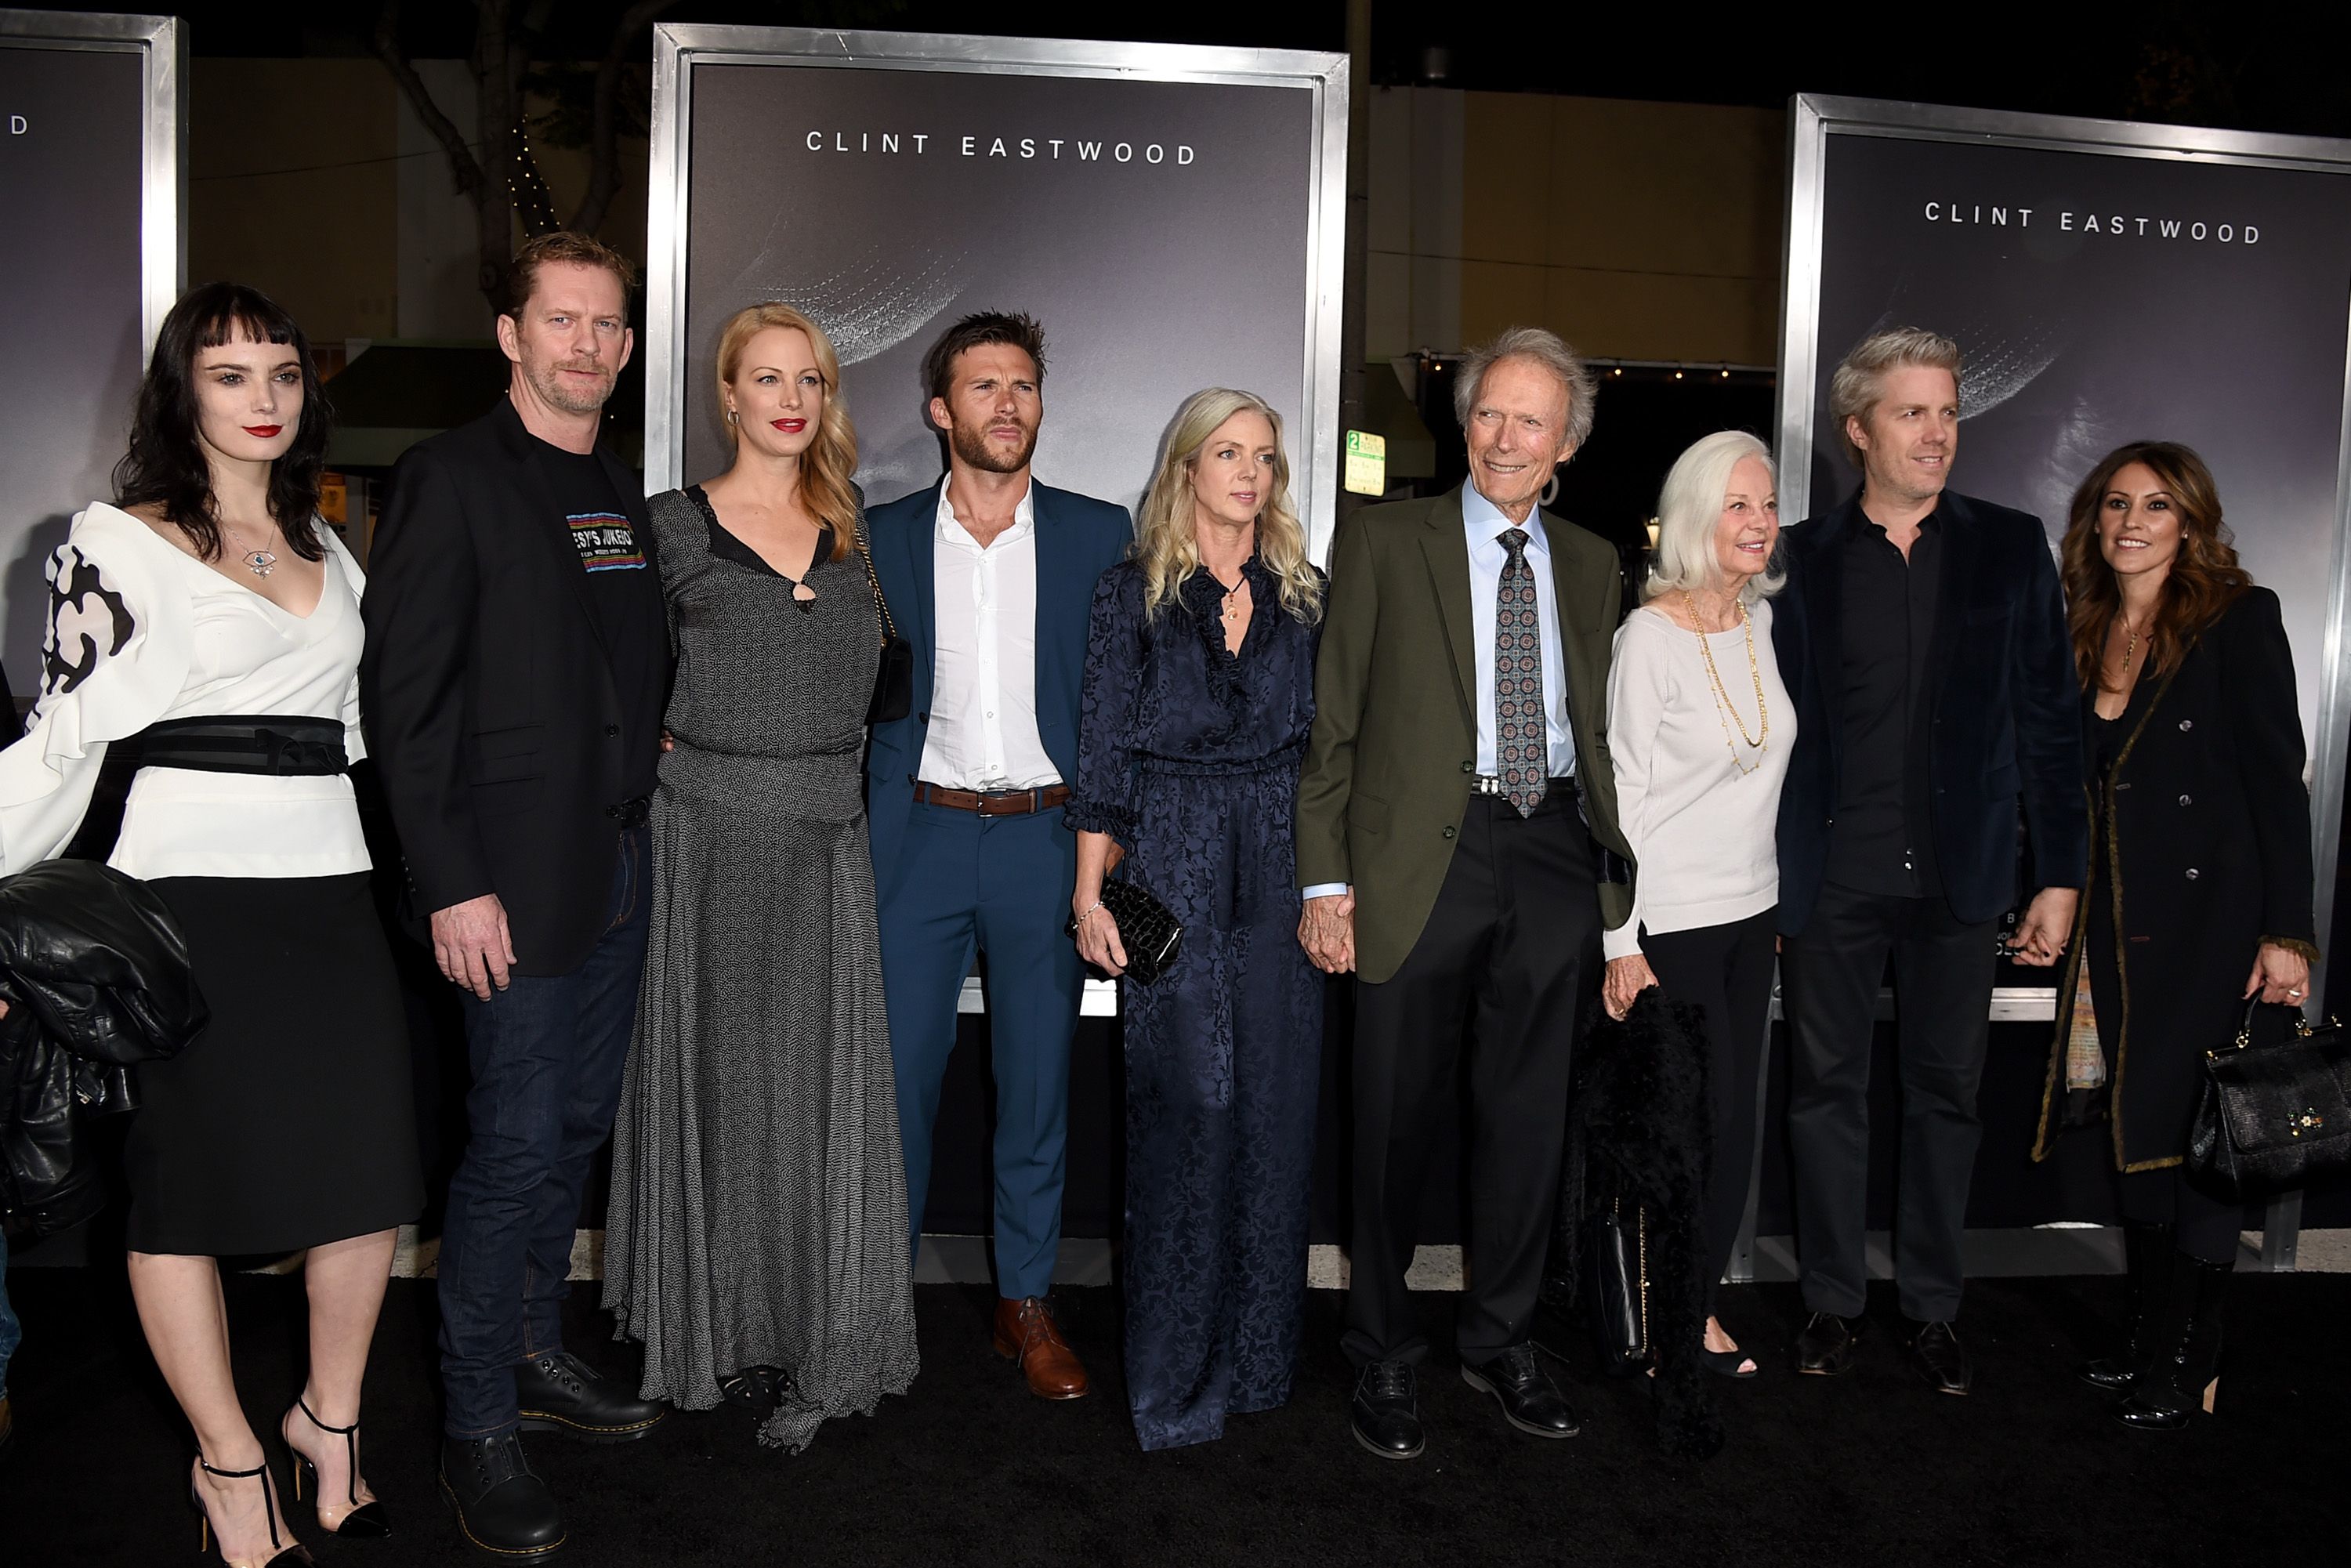 Clint Eastwood and family at the premiere of Warner Bros. Pictures' "The Mule" at the Village Theatre on December 10, 2018 | Photo: Getty Images